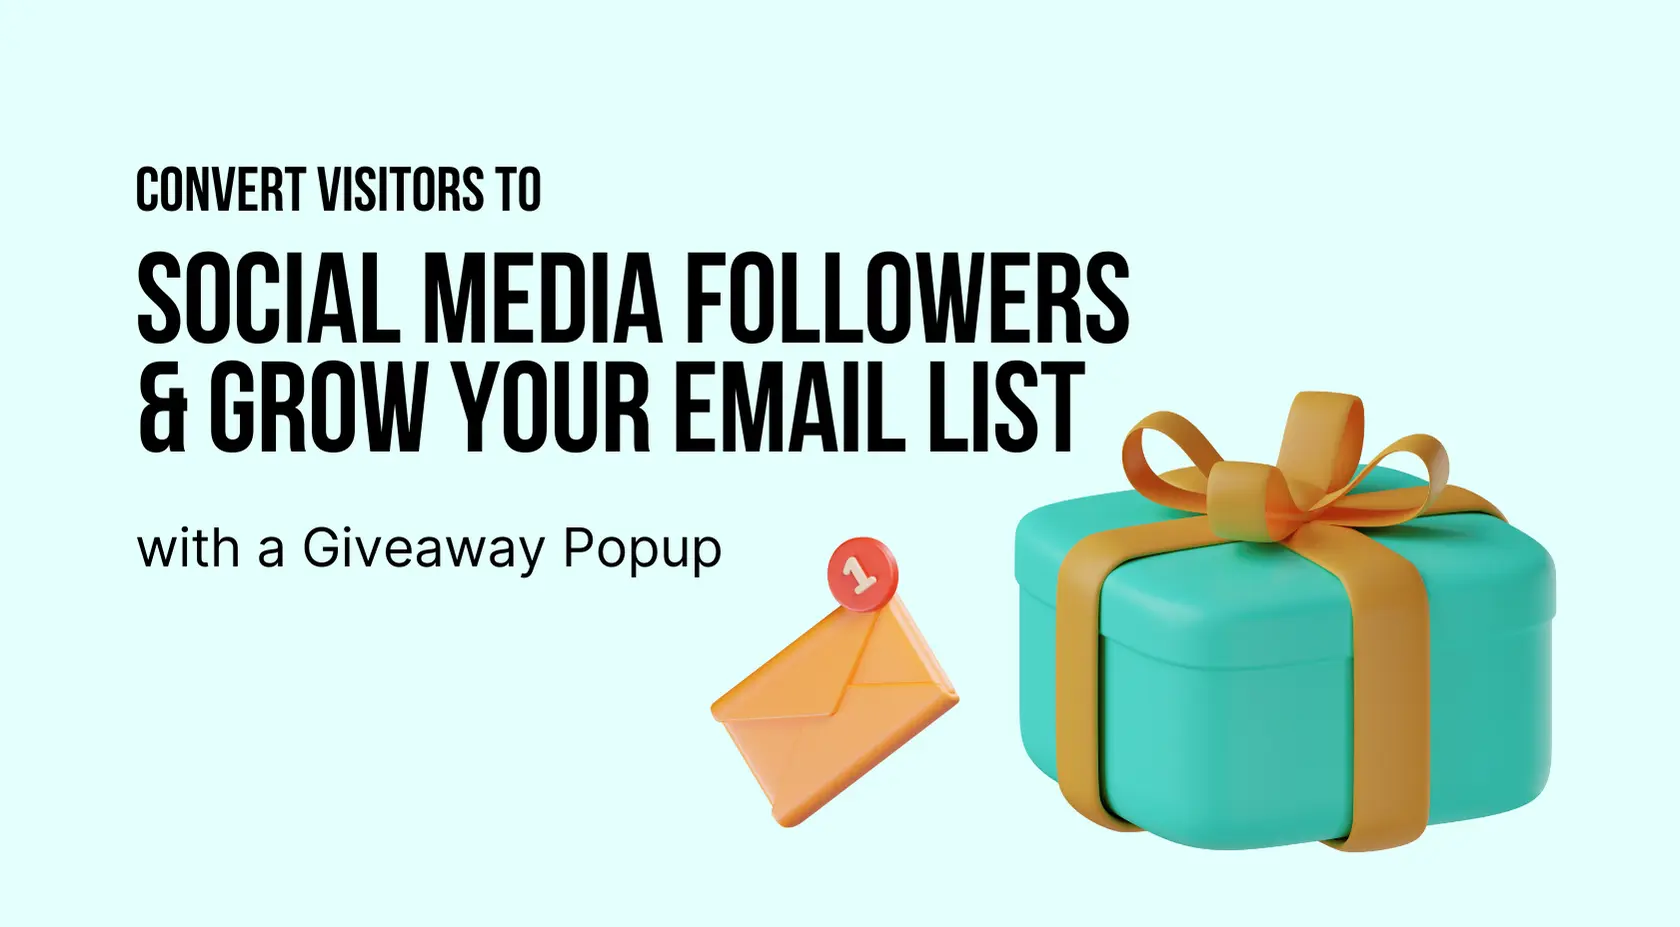 Convert Visitors to Social Media Followers & Grow Your Email List with a Giveaway Popup